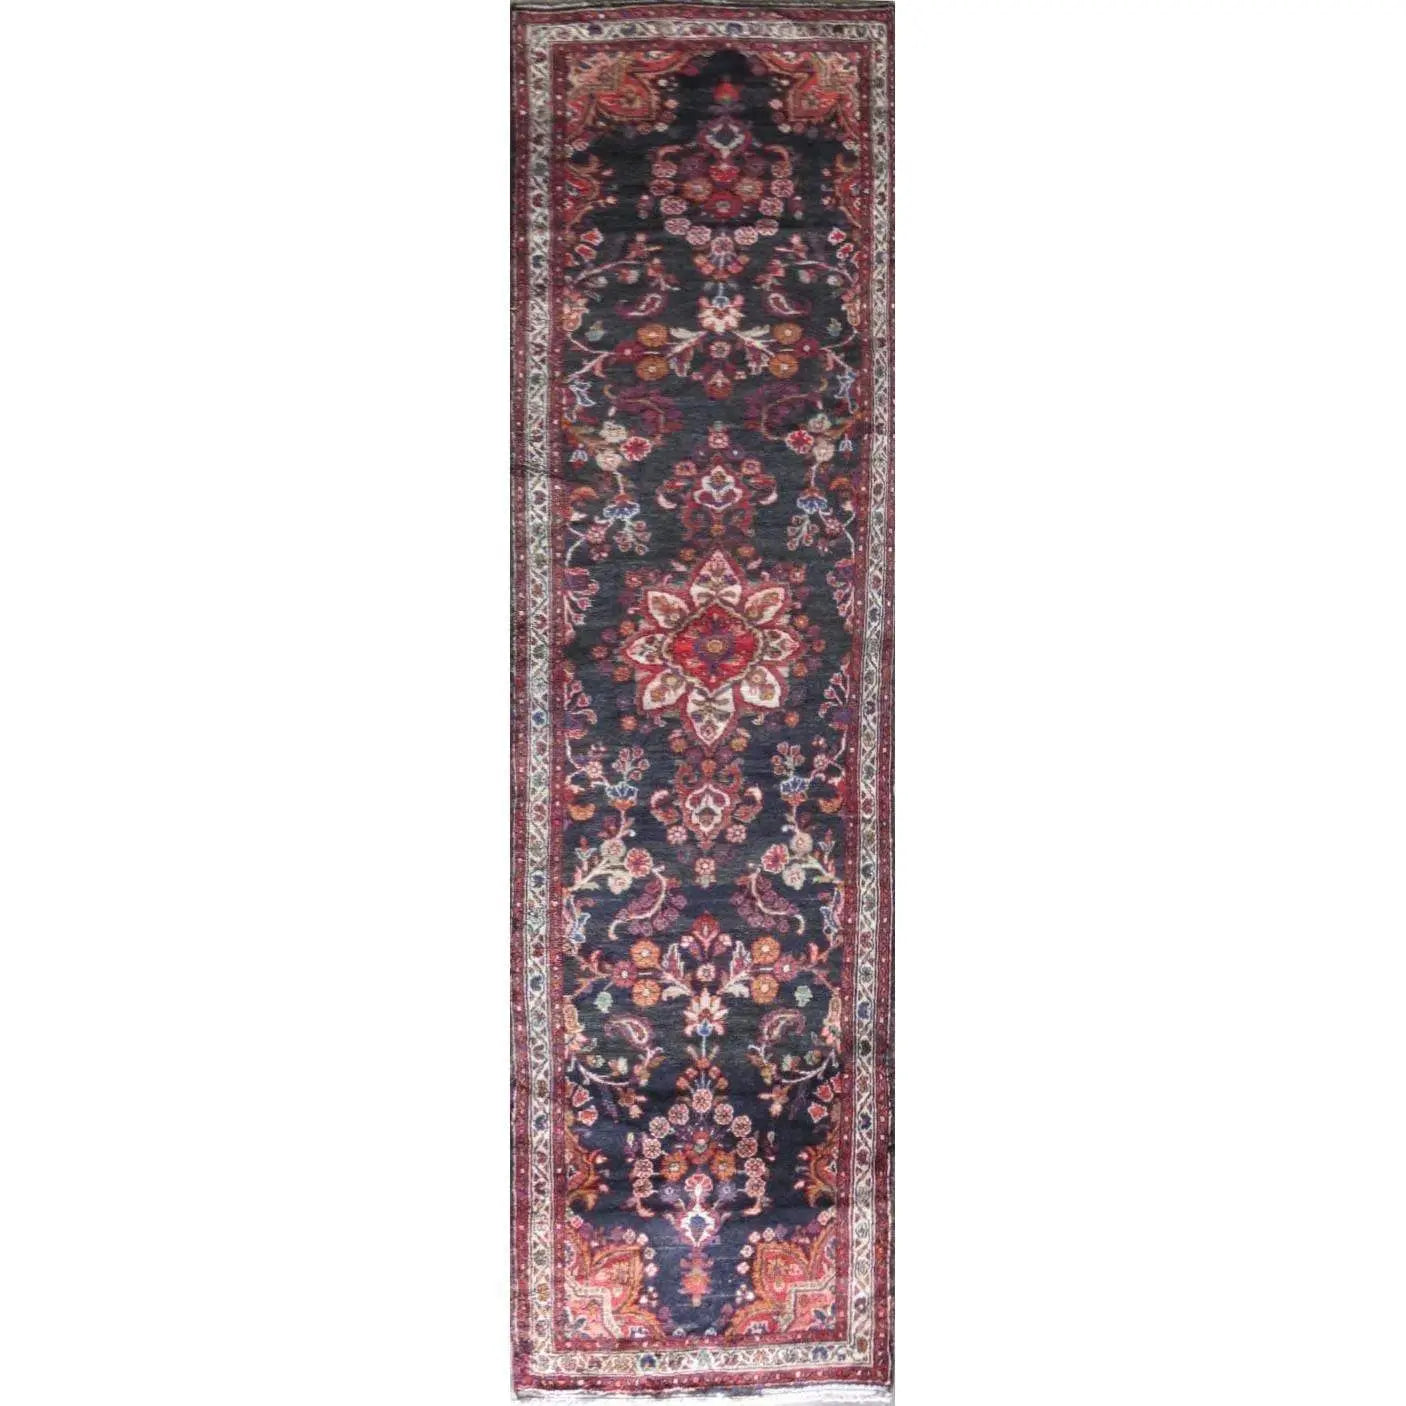 Hand-Knotted Persian Wool Rug _ Luxurious Vintage Design, 12'8" x 3'1", Artisan Crafted